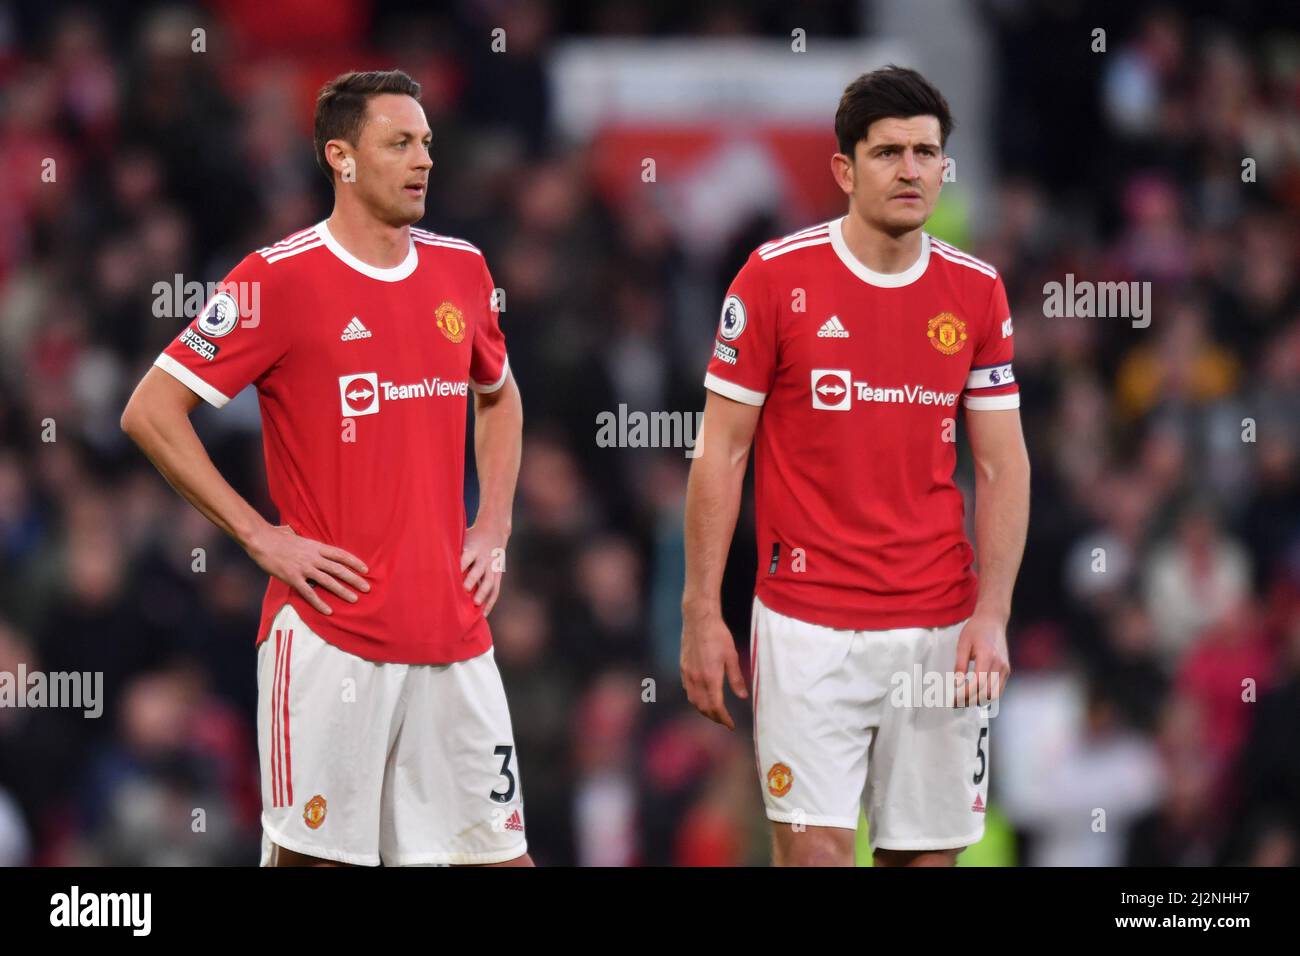 Manchester United's Nemanja Matic and Manchester United's Harry Maguire during the Premier League match at Old Trafford, Greater Manchester, UK. Picture date: Saturday April 2, 2022. Photo credit should read: Anthony Devlin Stock Photo